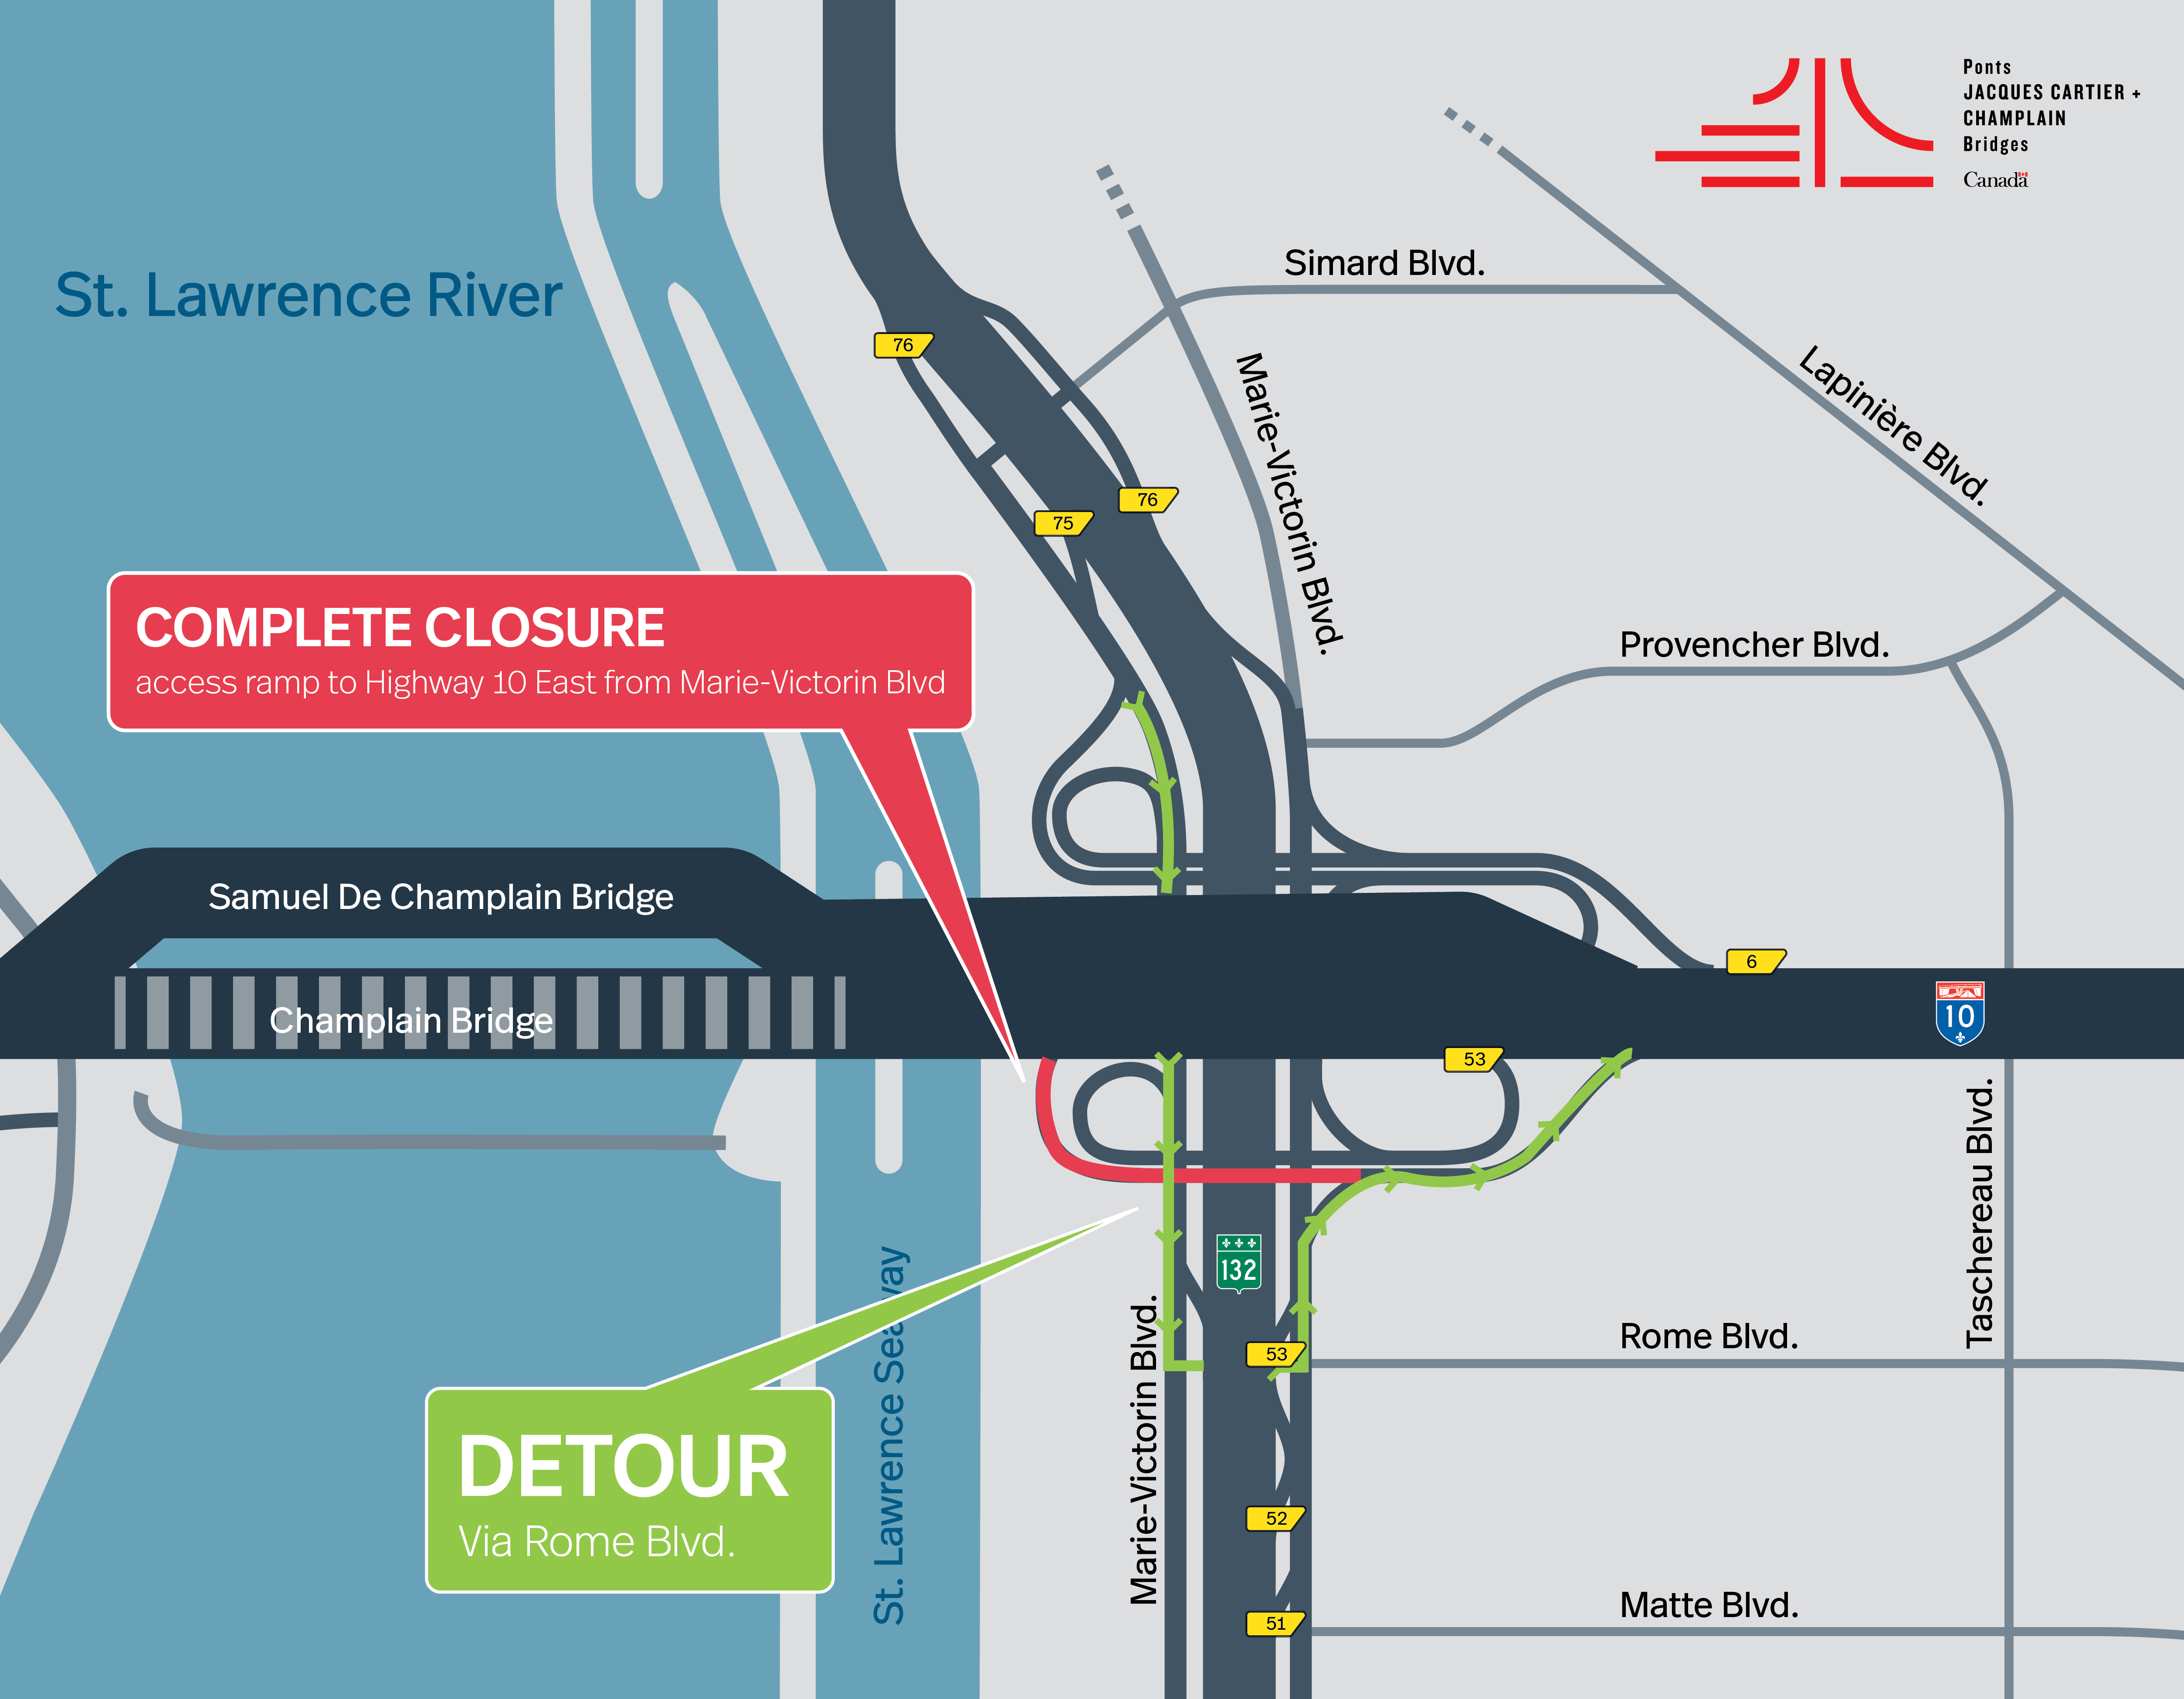 Brossard Sector | Complete closure of the access ramp from Blvd. Marie-Victorin West to Hwy. 10 East, on September 5